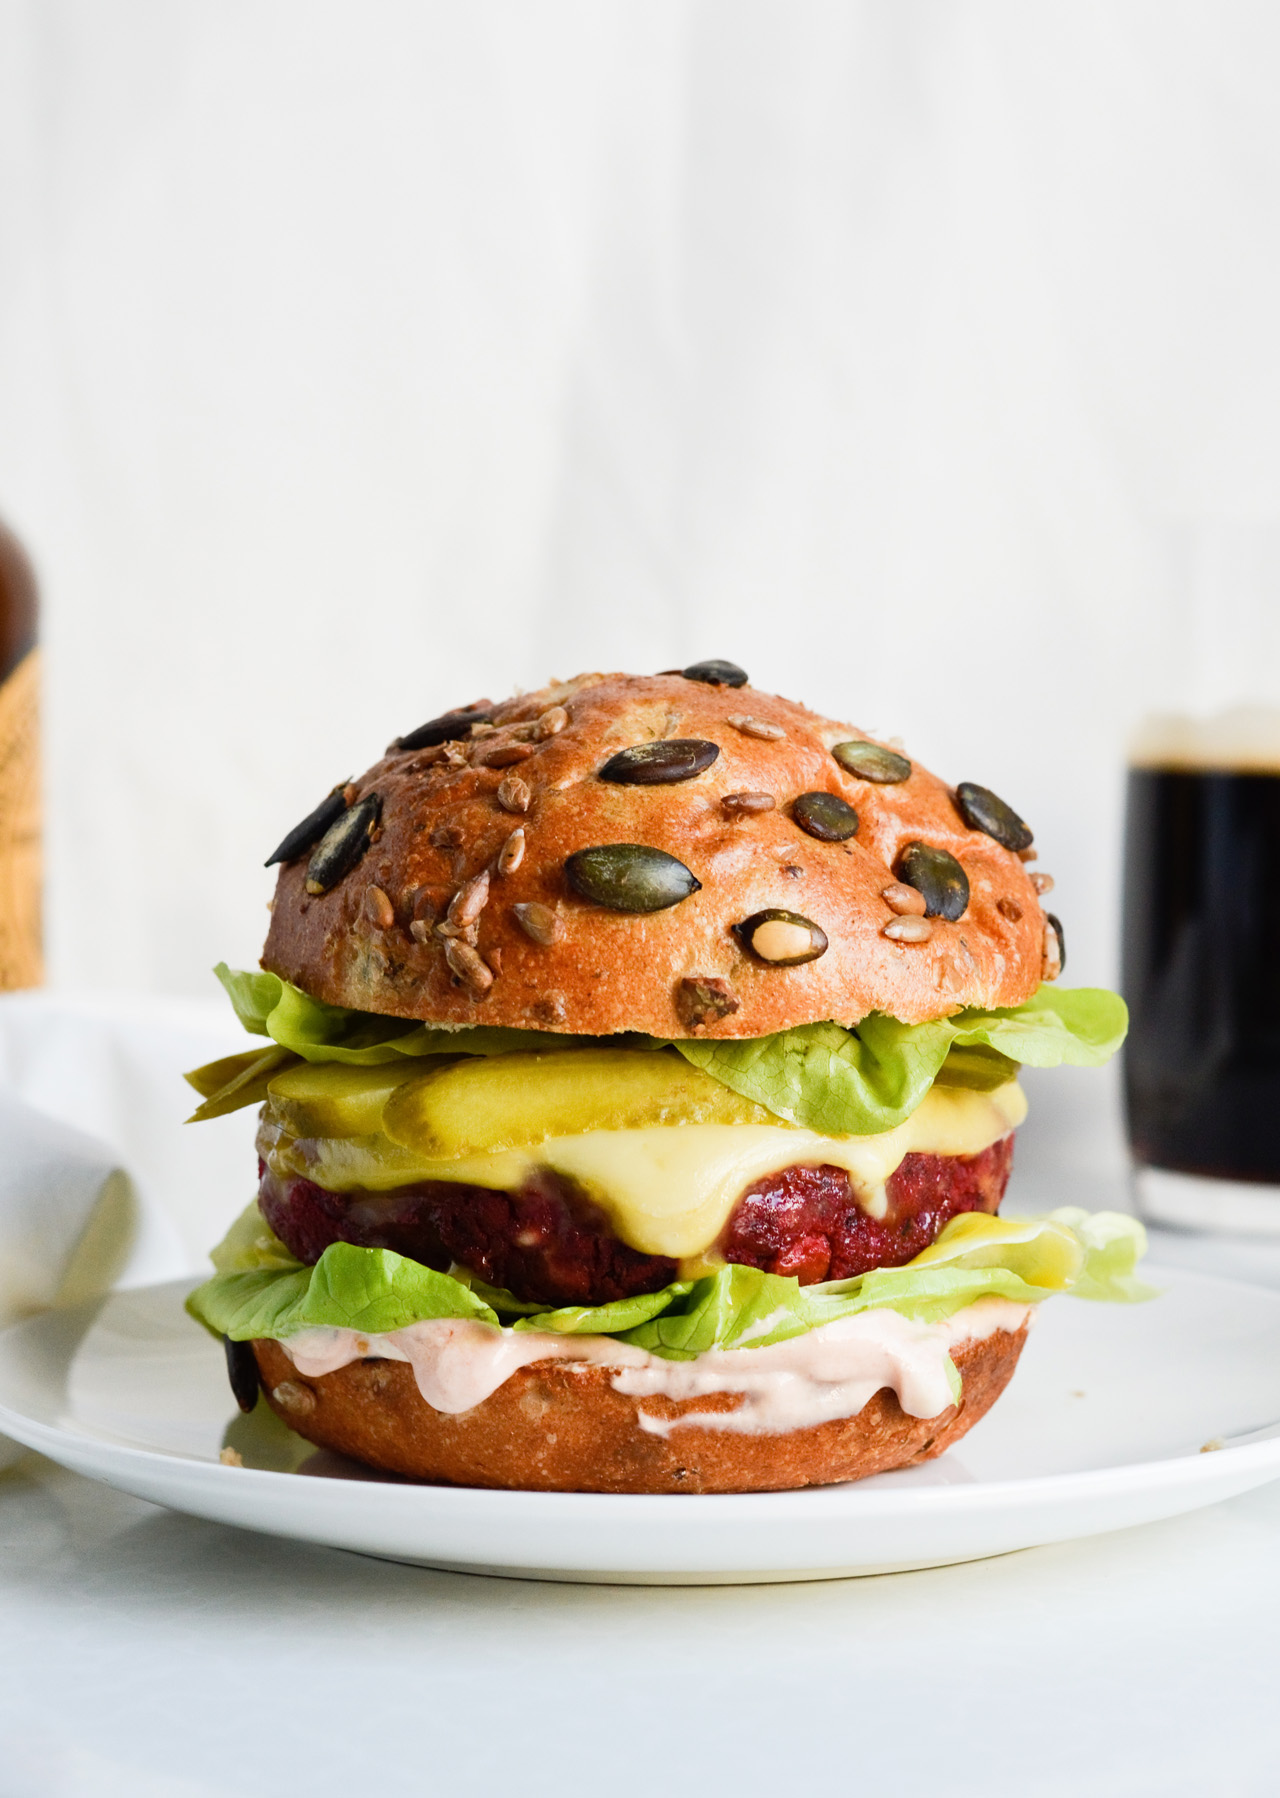 Royal vegetarian bean beet burger is the best vegetarian burger ever. Made with beets, beans, topped with honey mustard, cheese, lettuce, pickles and more! Totally dreamy, can be made ahead.